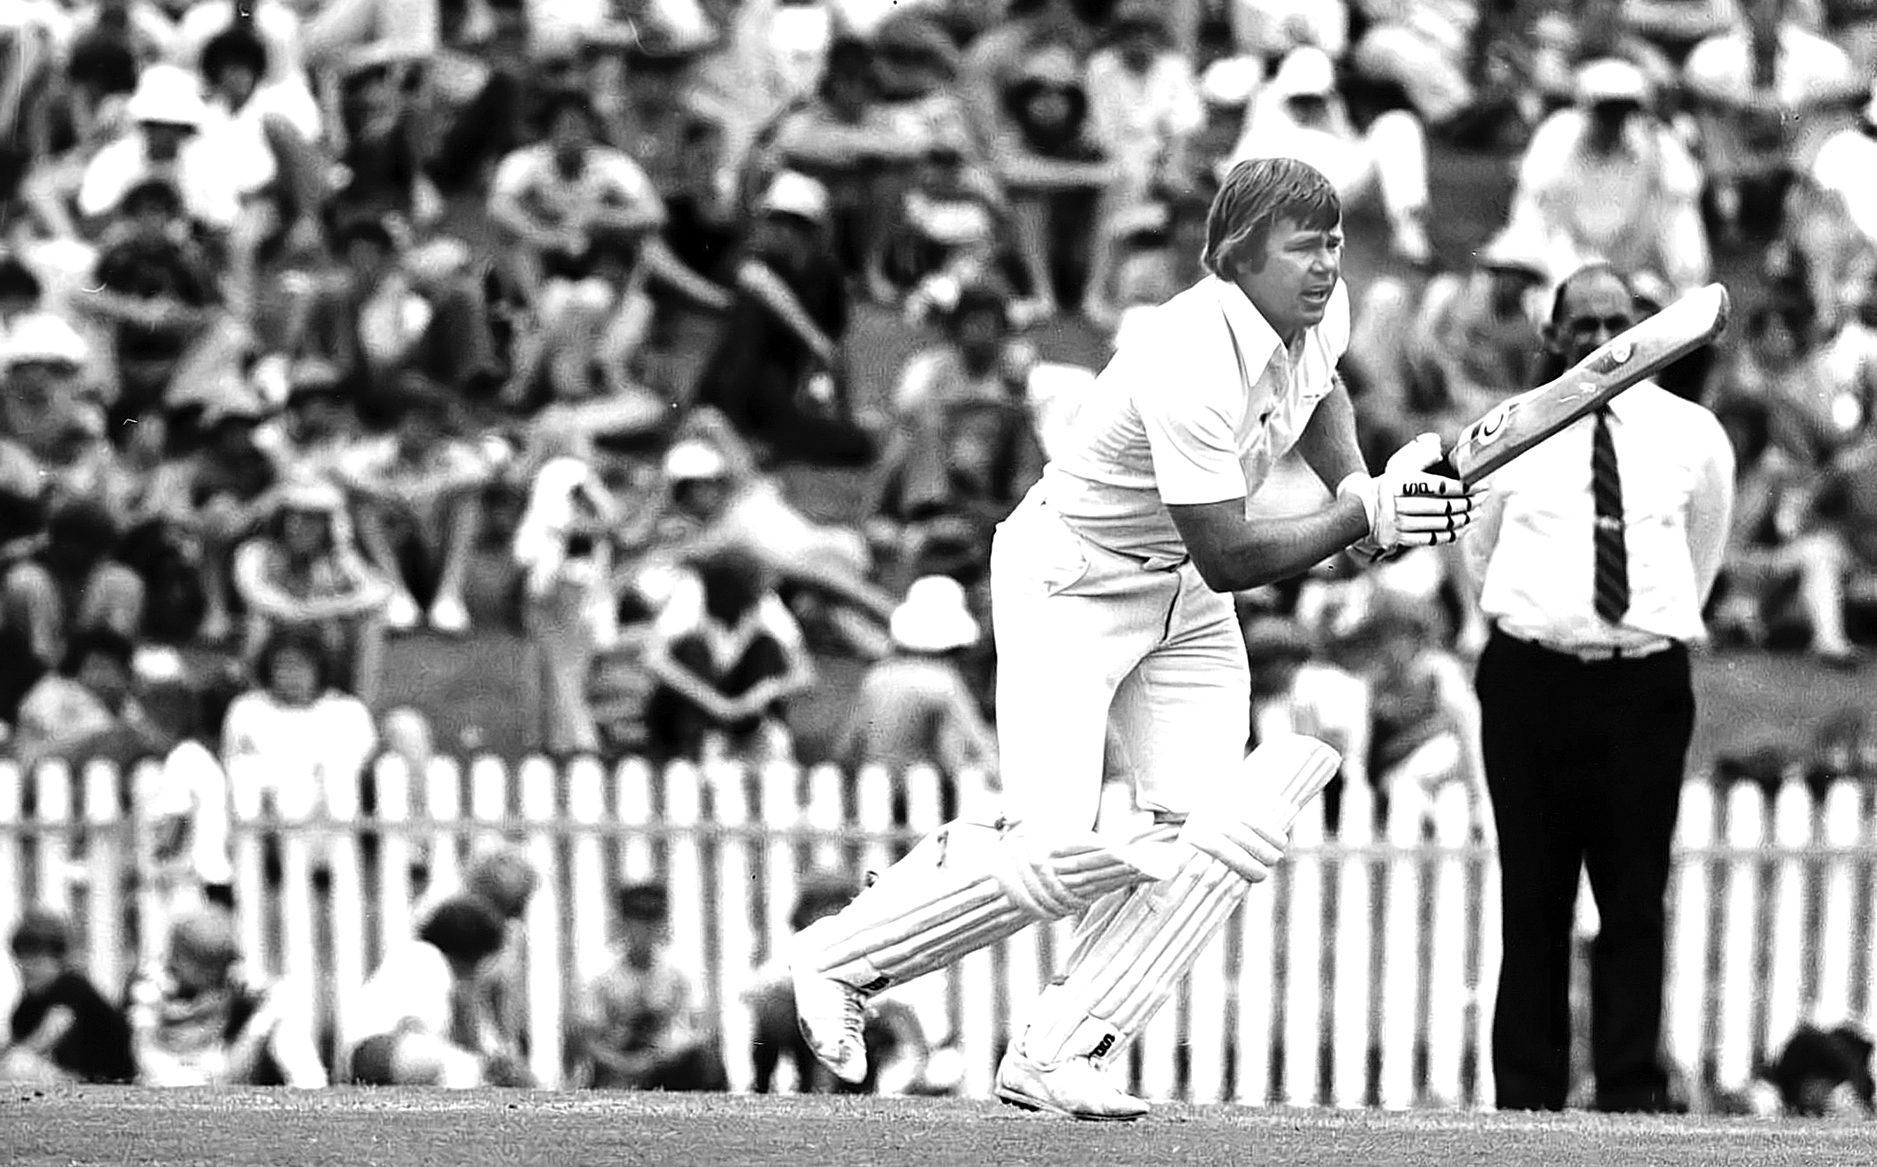 mike procter — a cricketing colossus who epitomised the best of the game